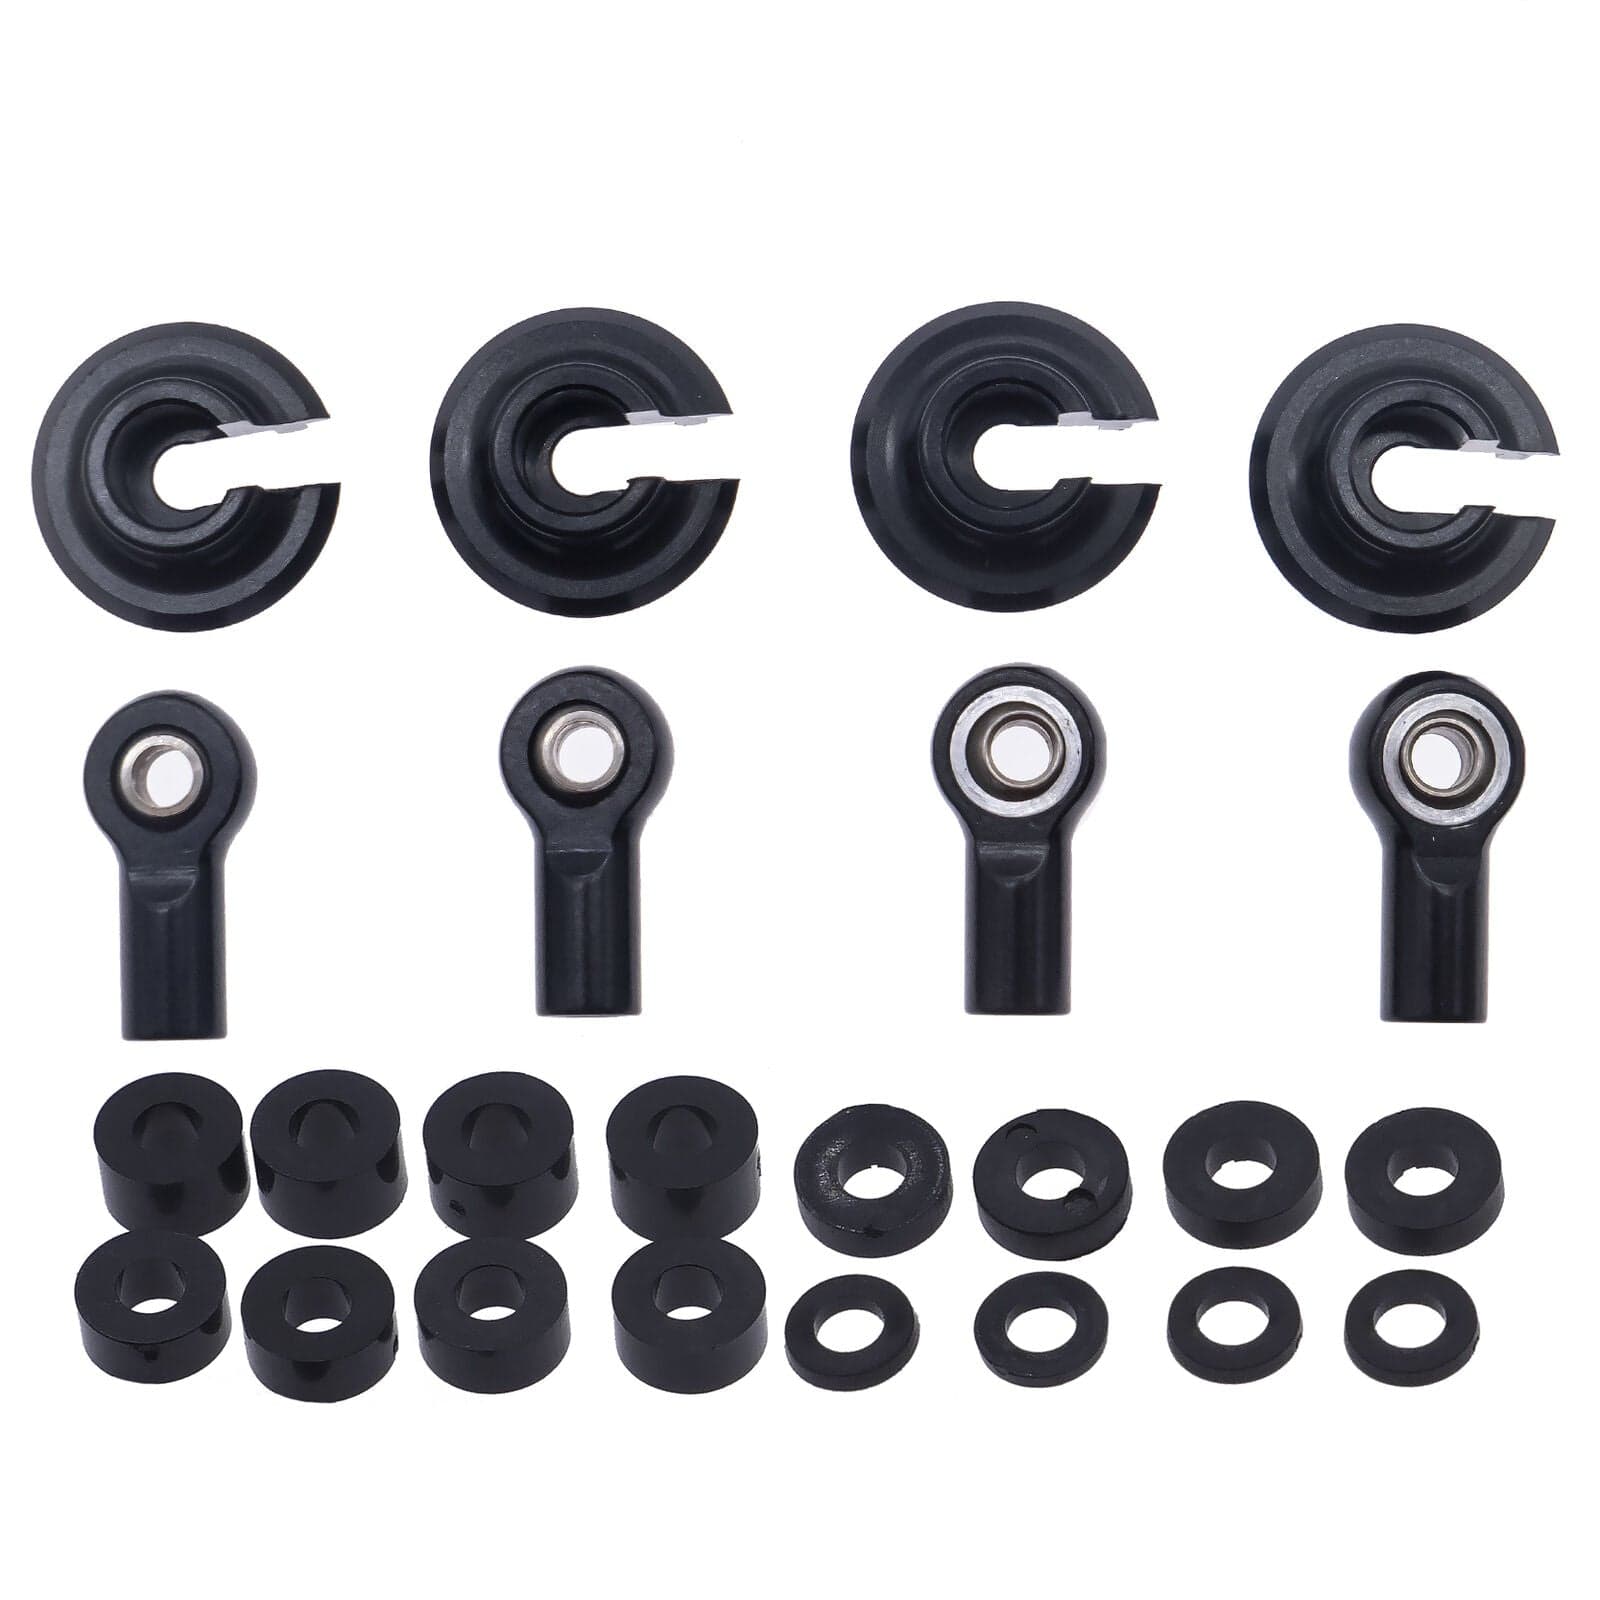 RCAWD ECX UPGRADE PARTS Black RCAWD Shock Ends Spring Cups Spring Clips for 1/10 ECX 2WD Series